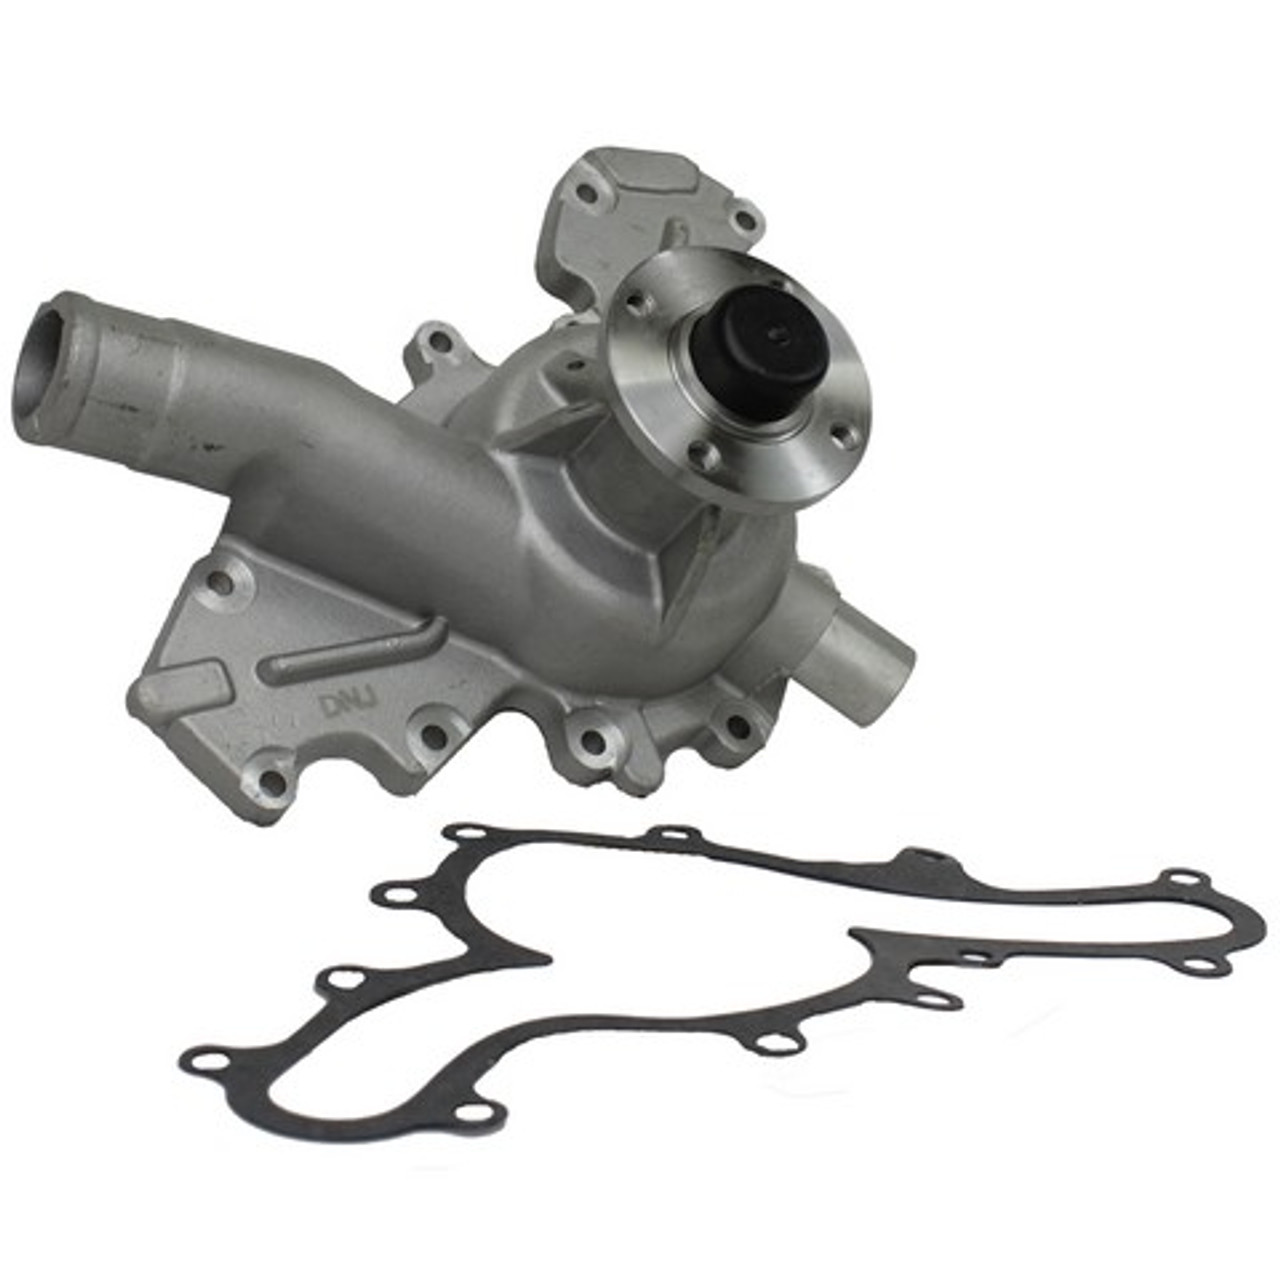 Water Pump 4.0L 2007 Ford Mustang - WP4028.25